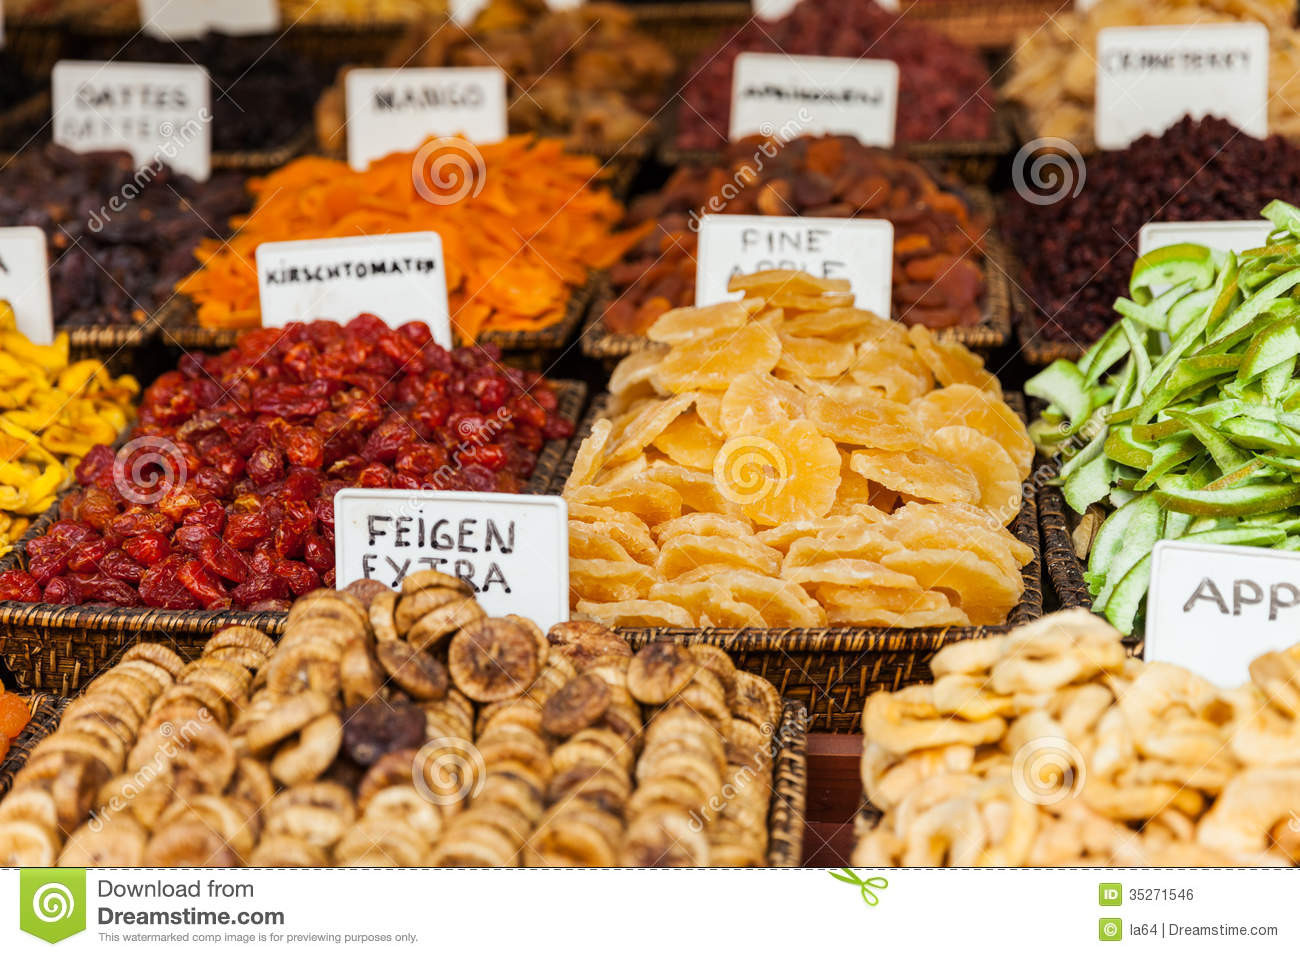 Healthy Dry Snacks 20 Best Healthy Eating Dried Fruit Snack at Food Market Stock